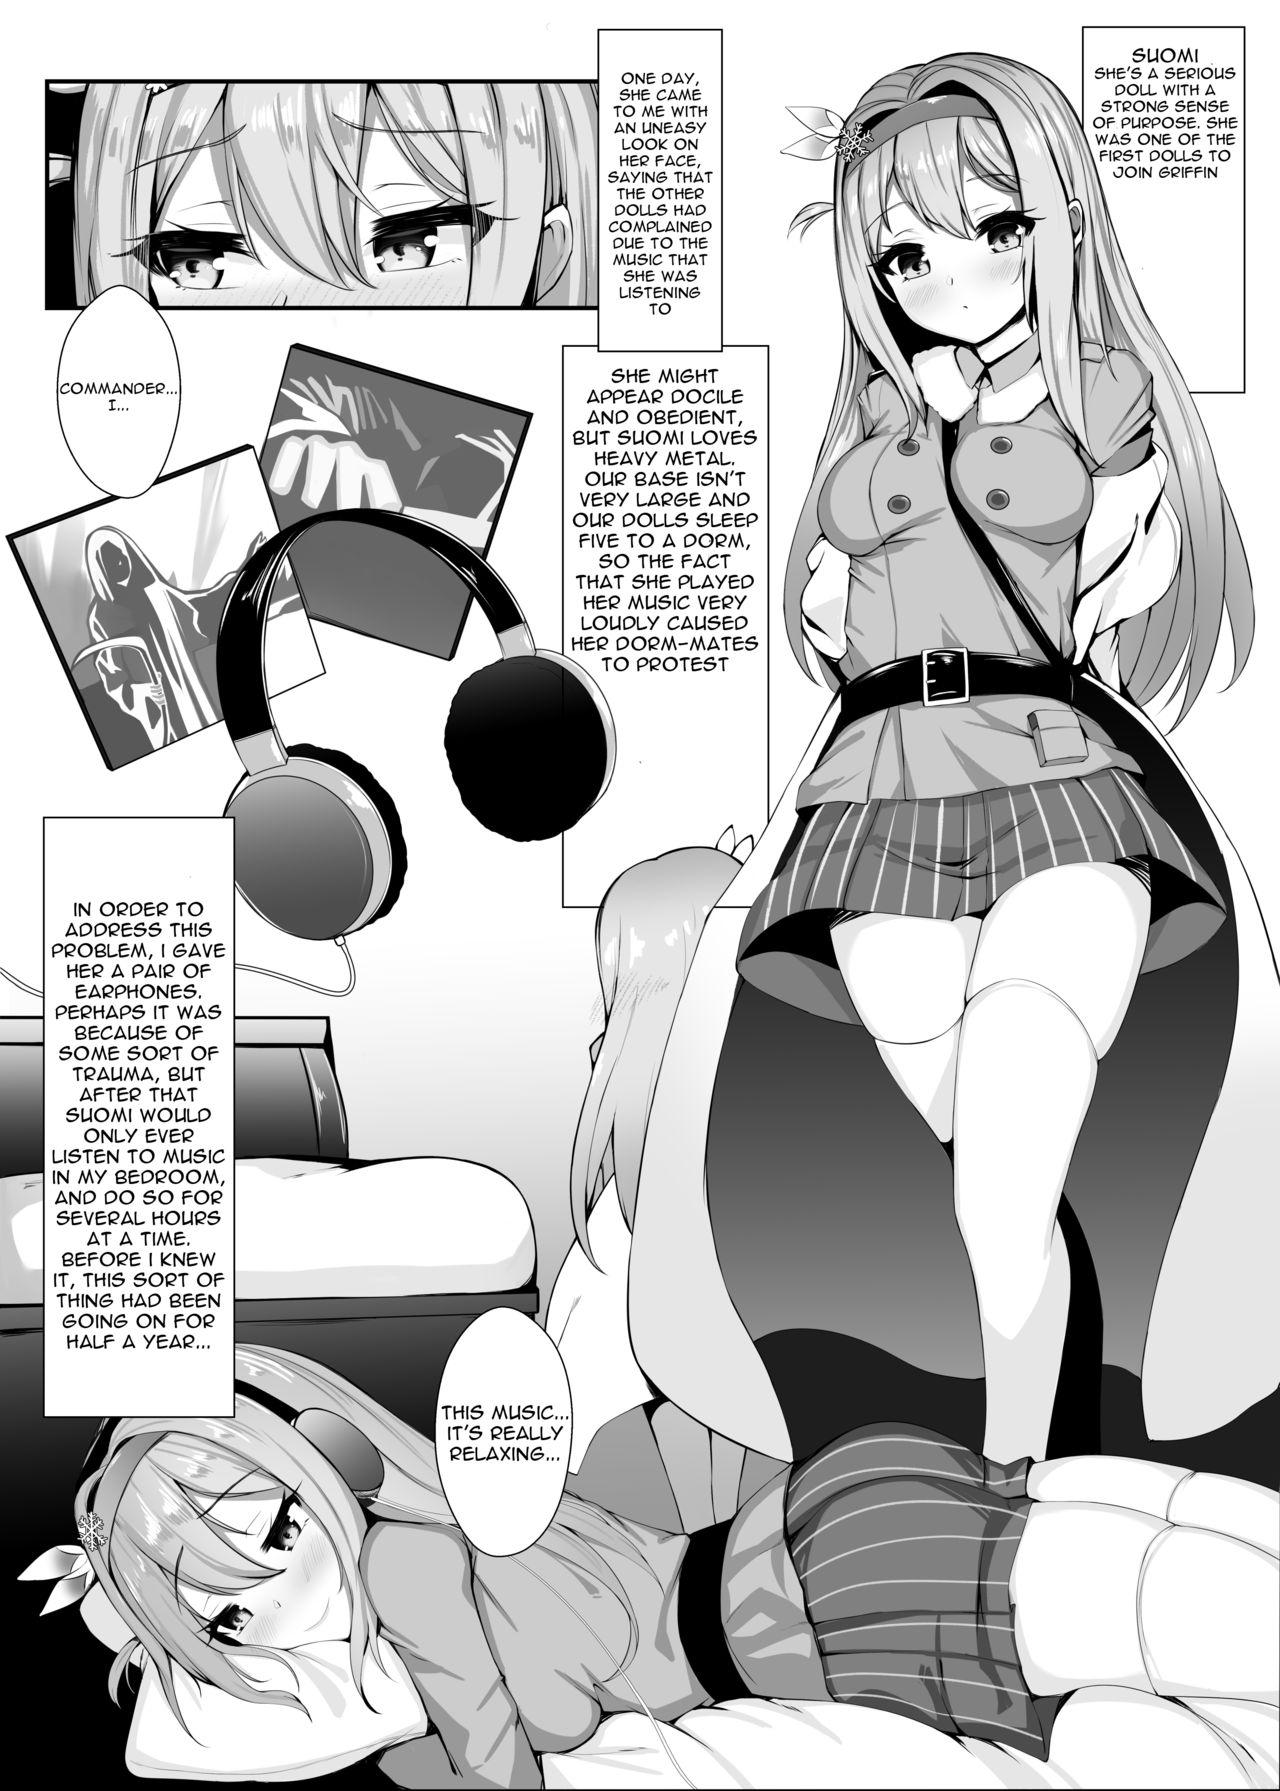 Couples Suomi - Mission of Love - Girls frontline Free Blowjob - Page 4